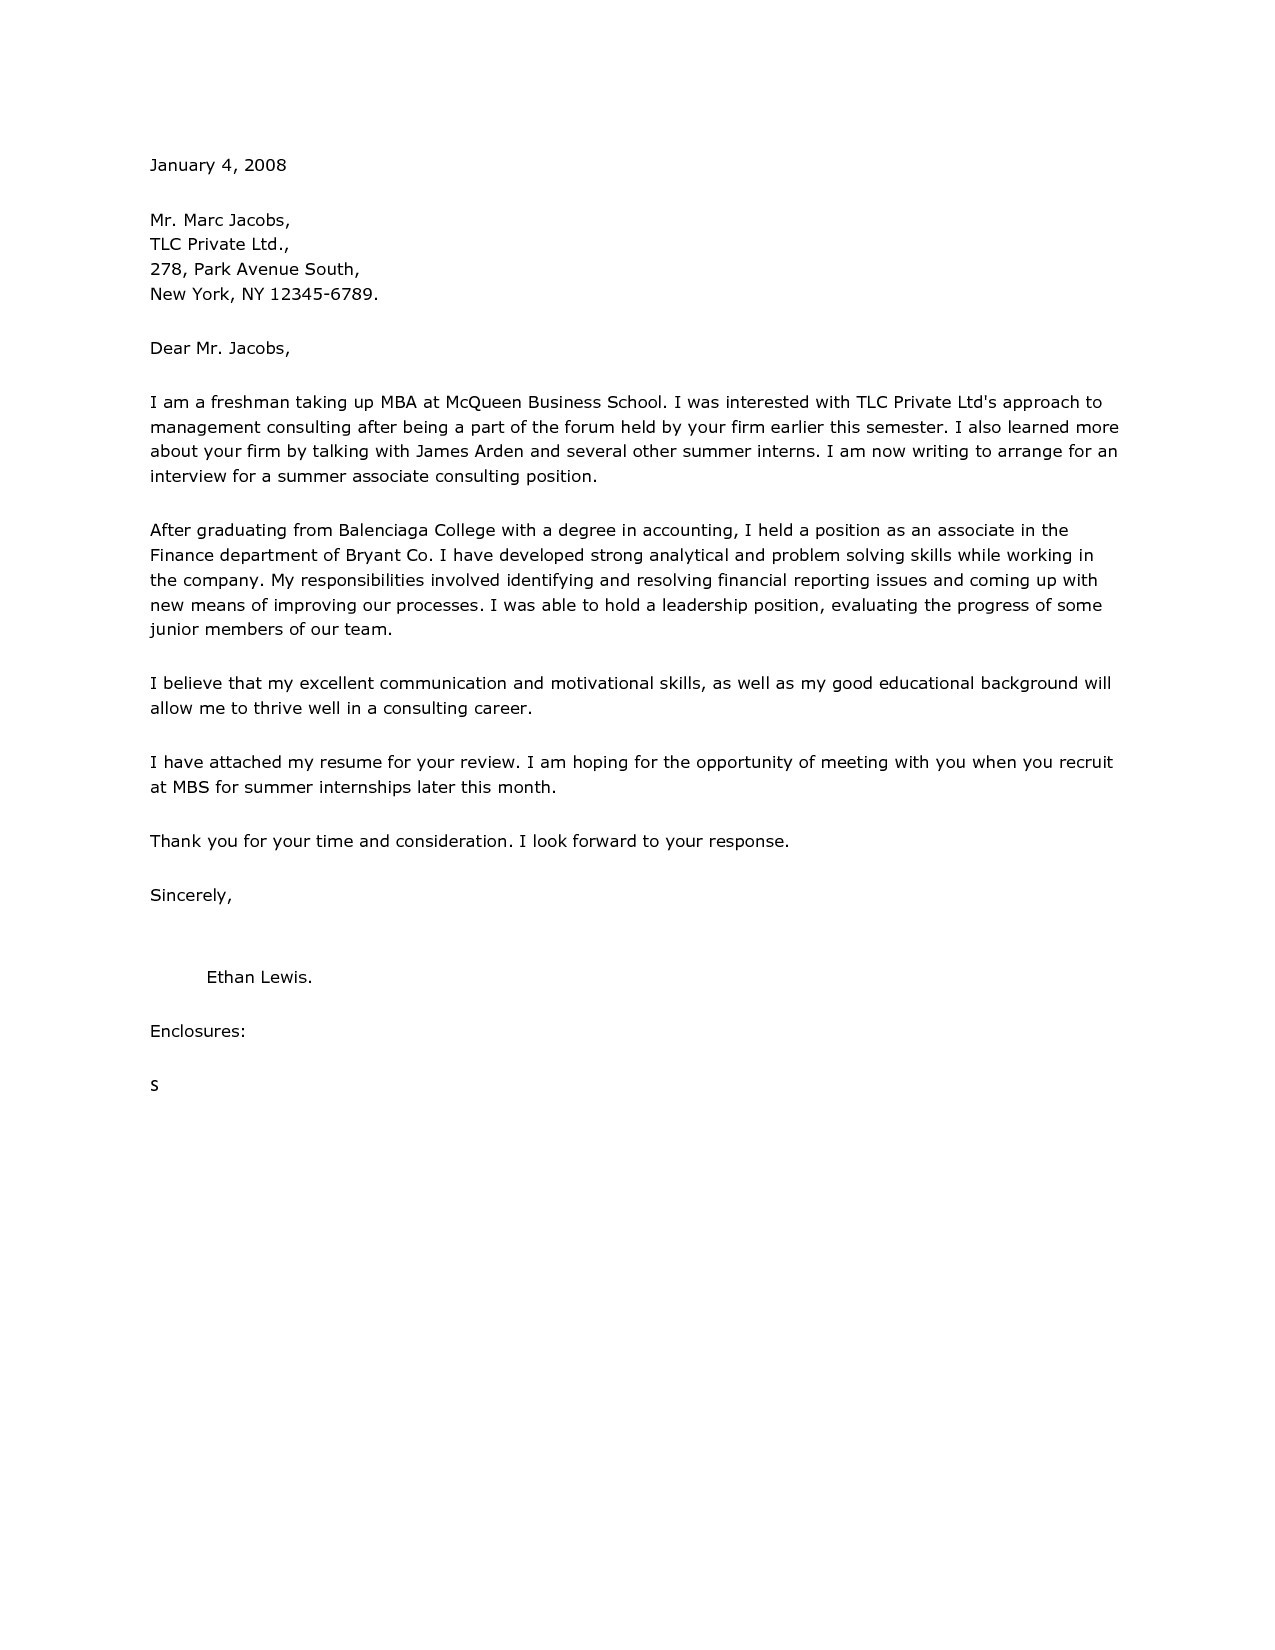 I Want to Buy Your House Letter Template - Archaicawful I Want to Buy Your House Letter Template